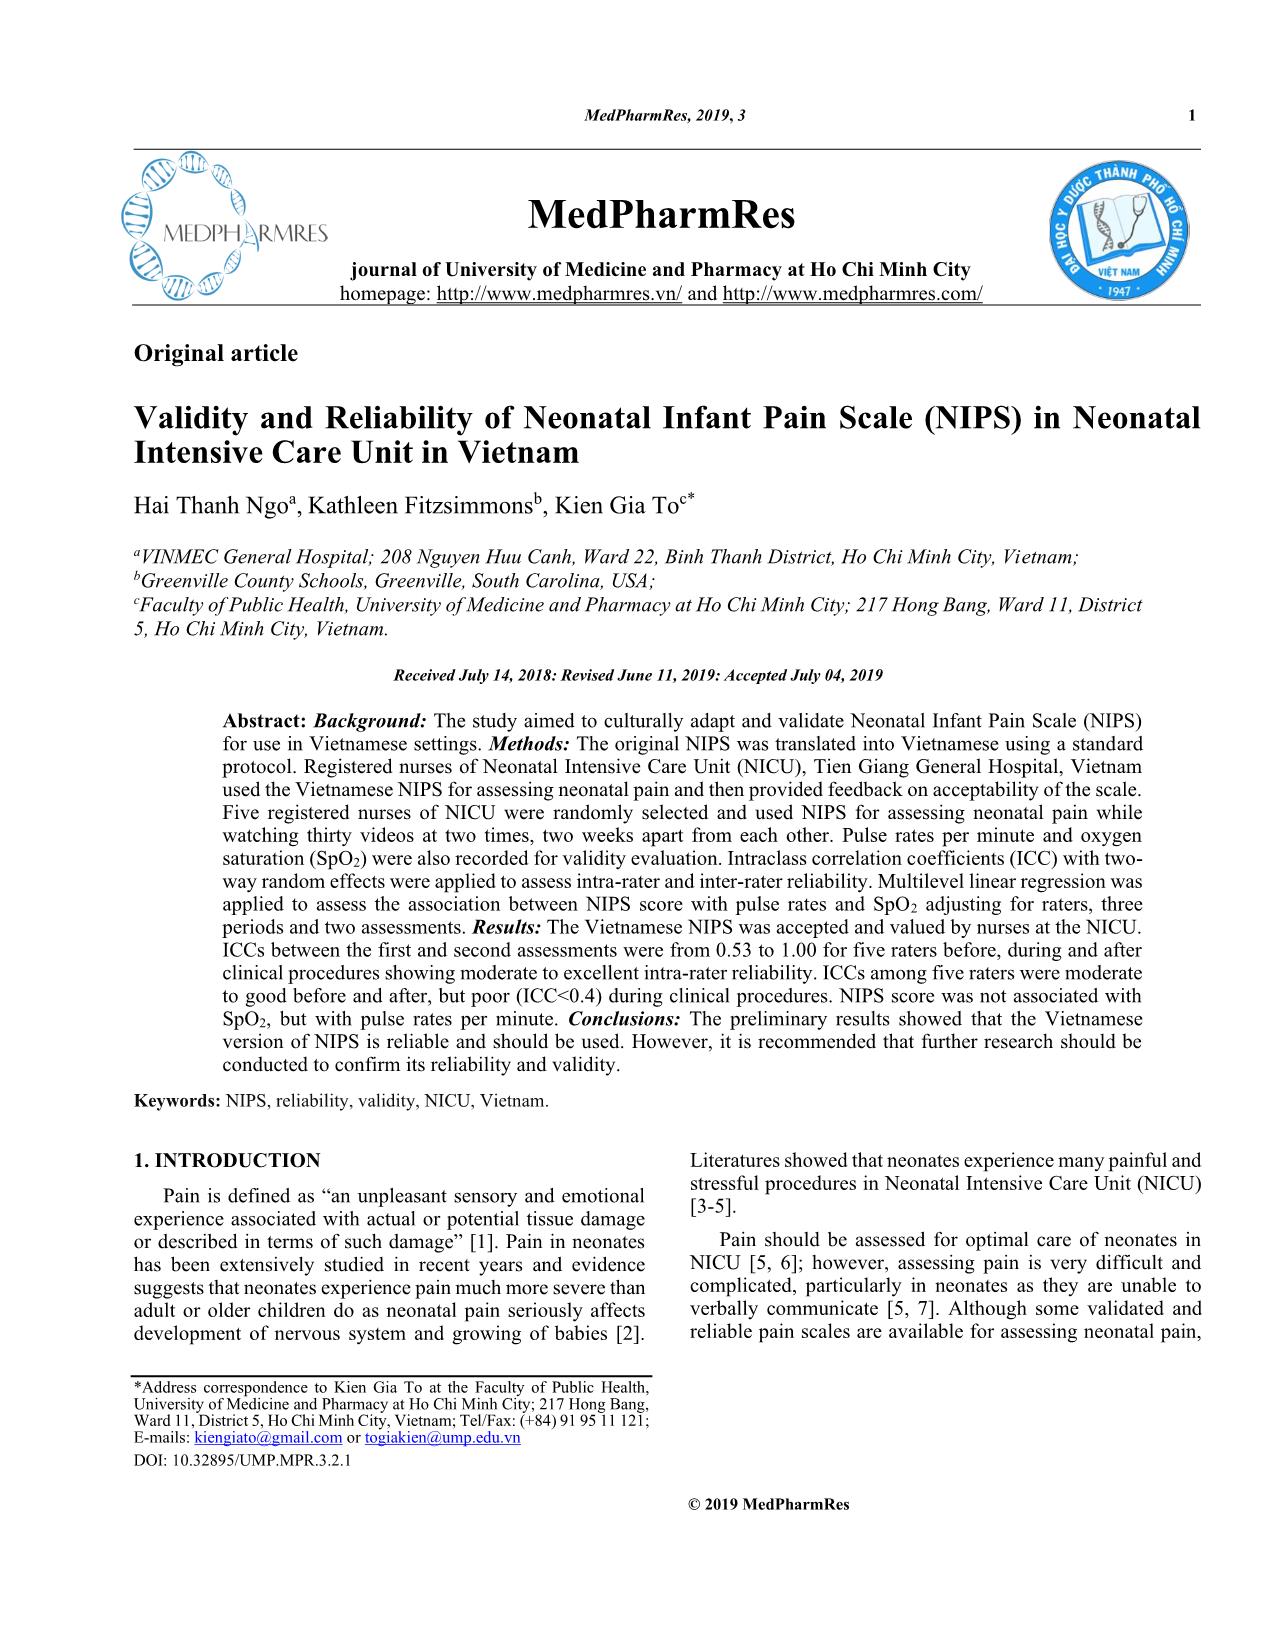 Validity and reliability of neonatal infant pain scale (NIPS) in neonatal intensive care unit in Viet Nam trang 1